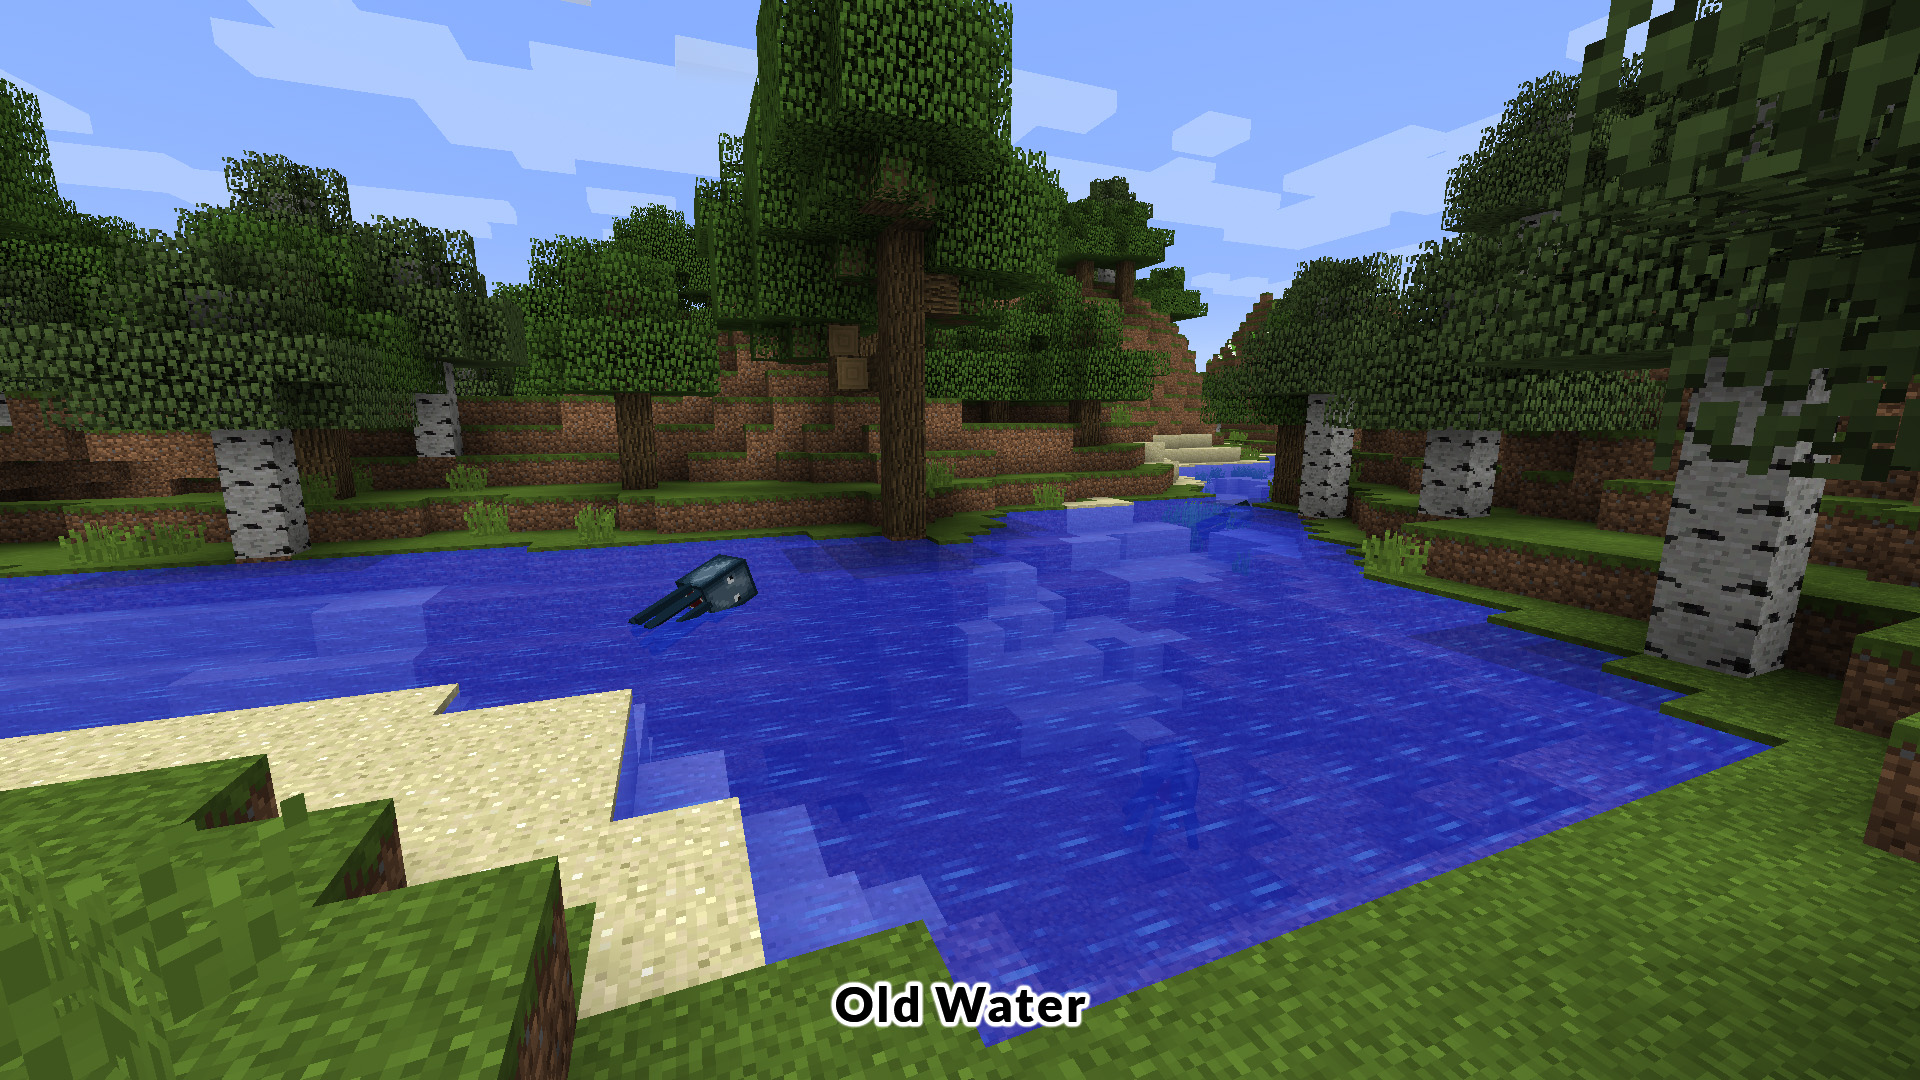 Old water